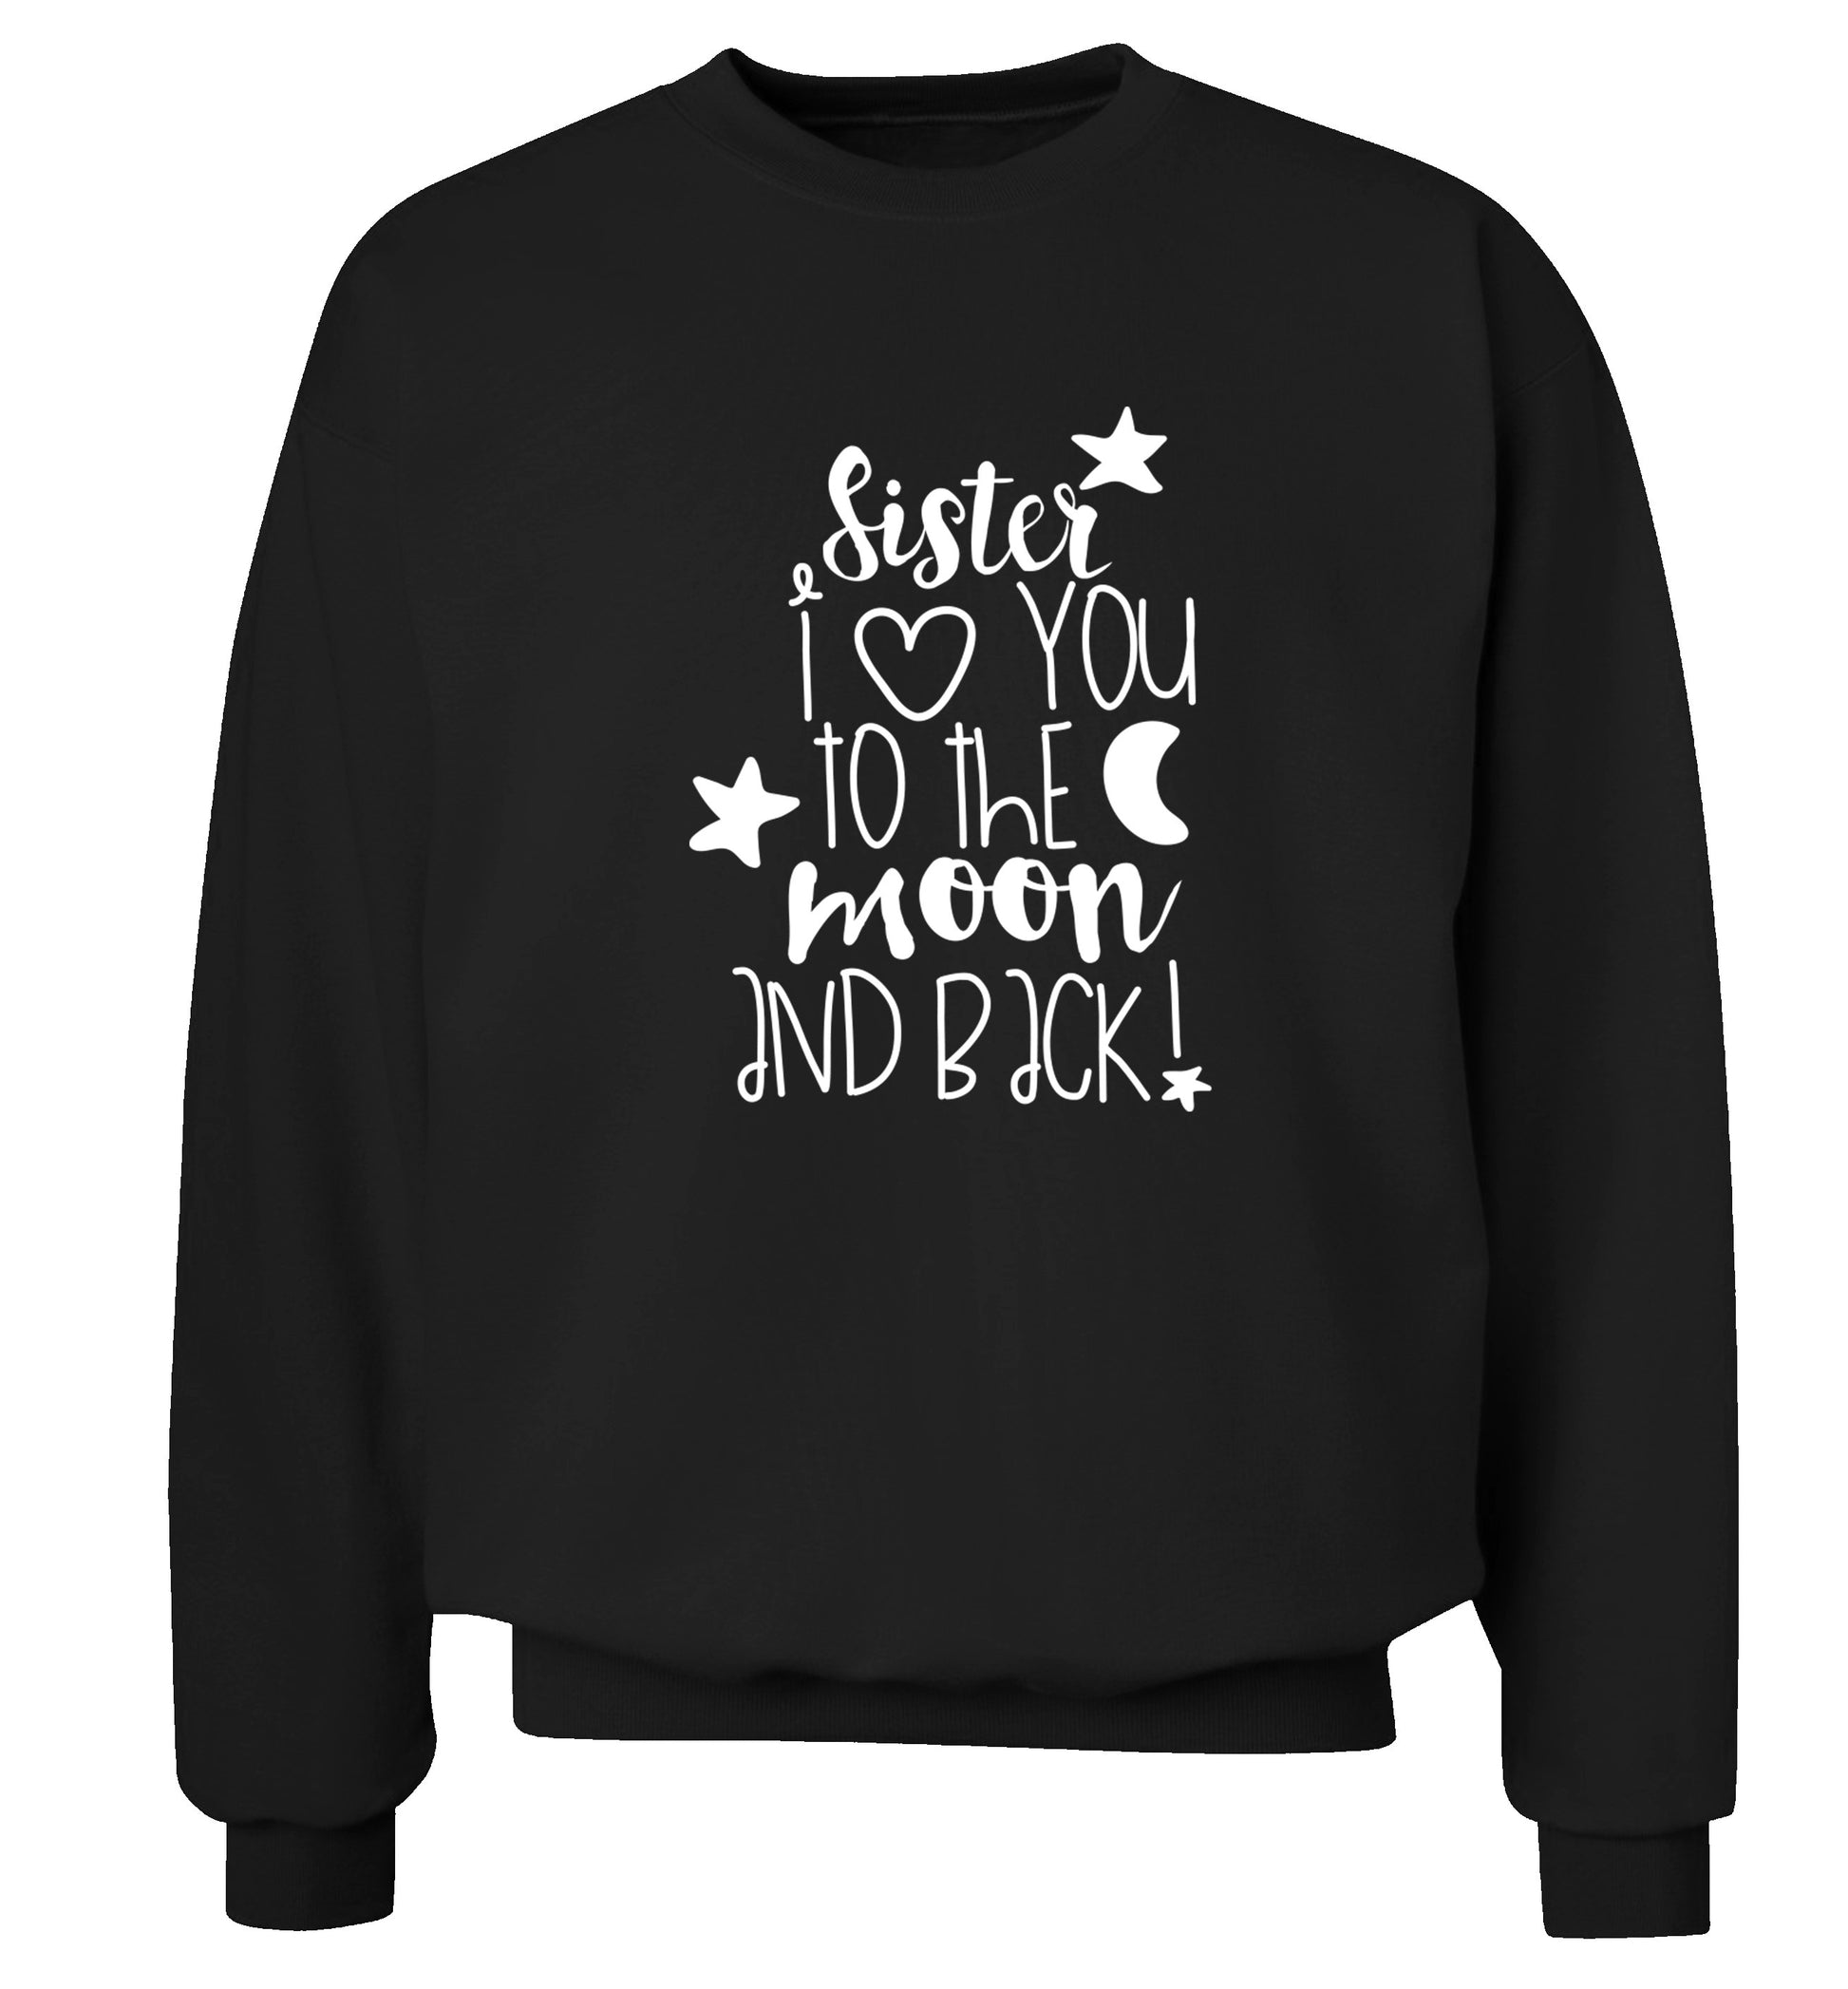 Sister I love you to the moon and back Adult's unisex black  sweater 2XL